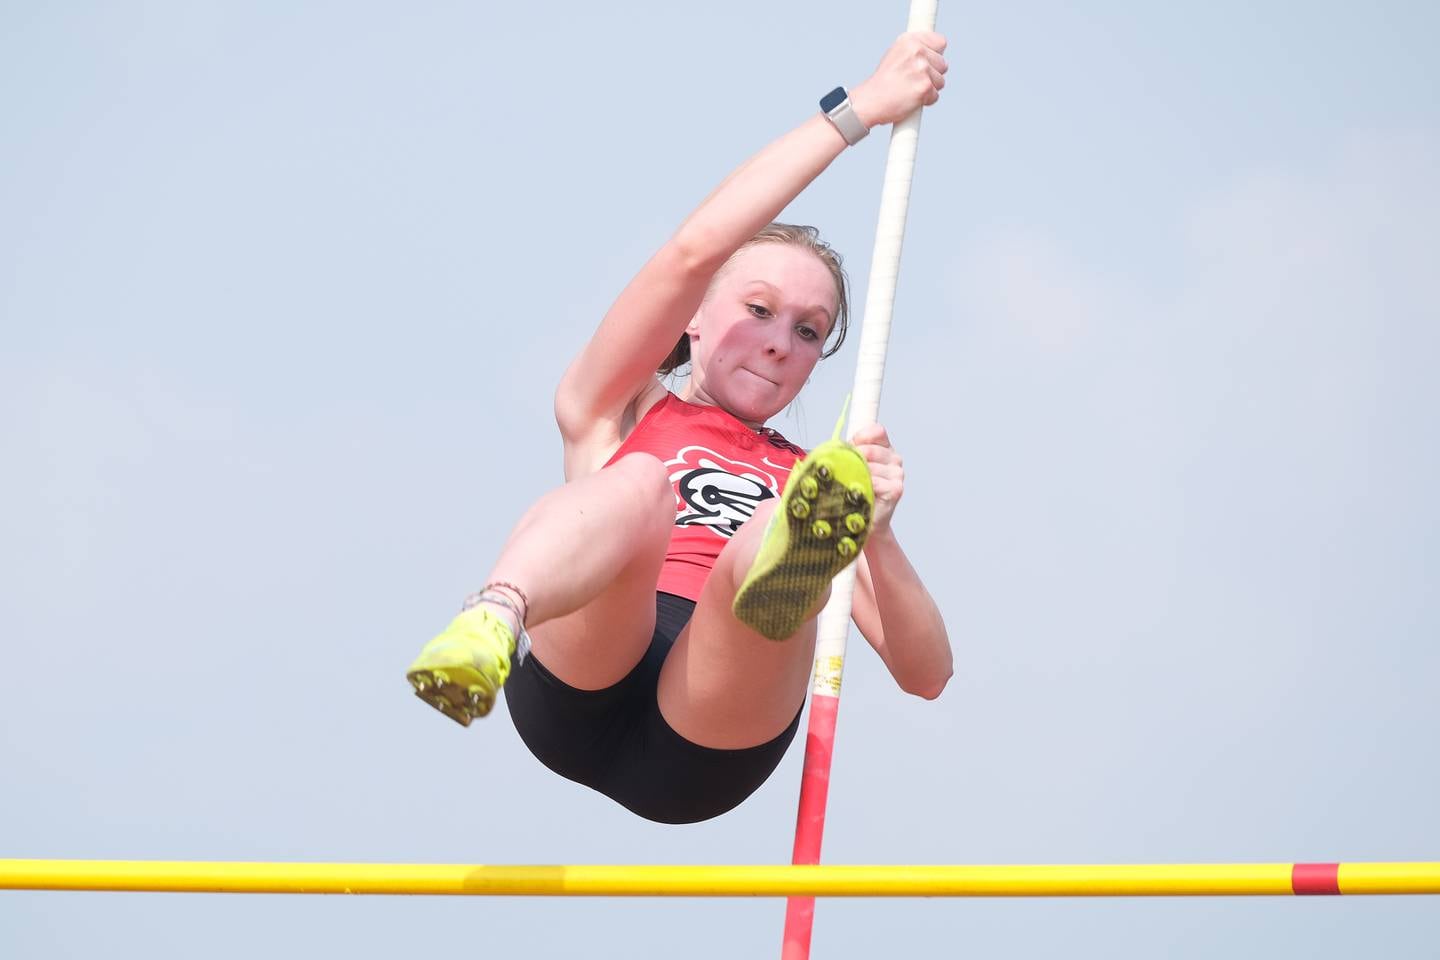 Lincoln-Way Central’s Rachel Svancarek competes in the pole vault at the Class 3A Minooka Girls Sectionals. Wednesday, May 11, 2022, in Minooka.